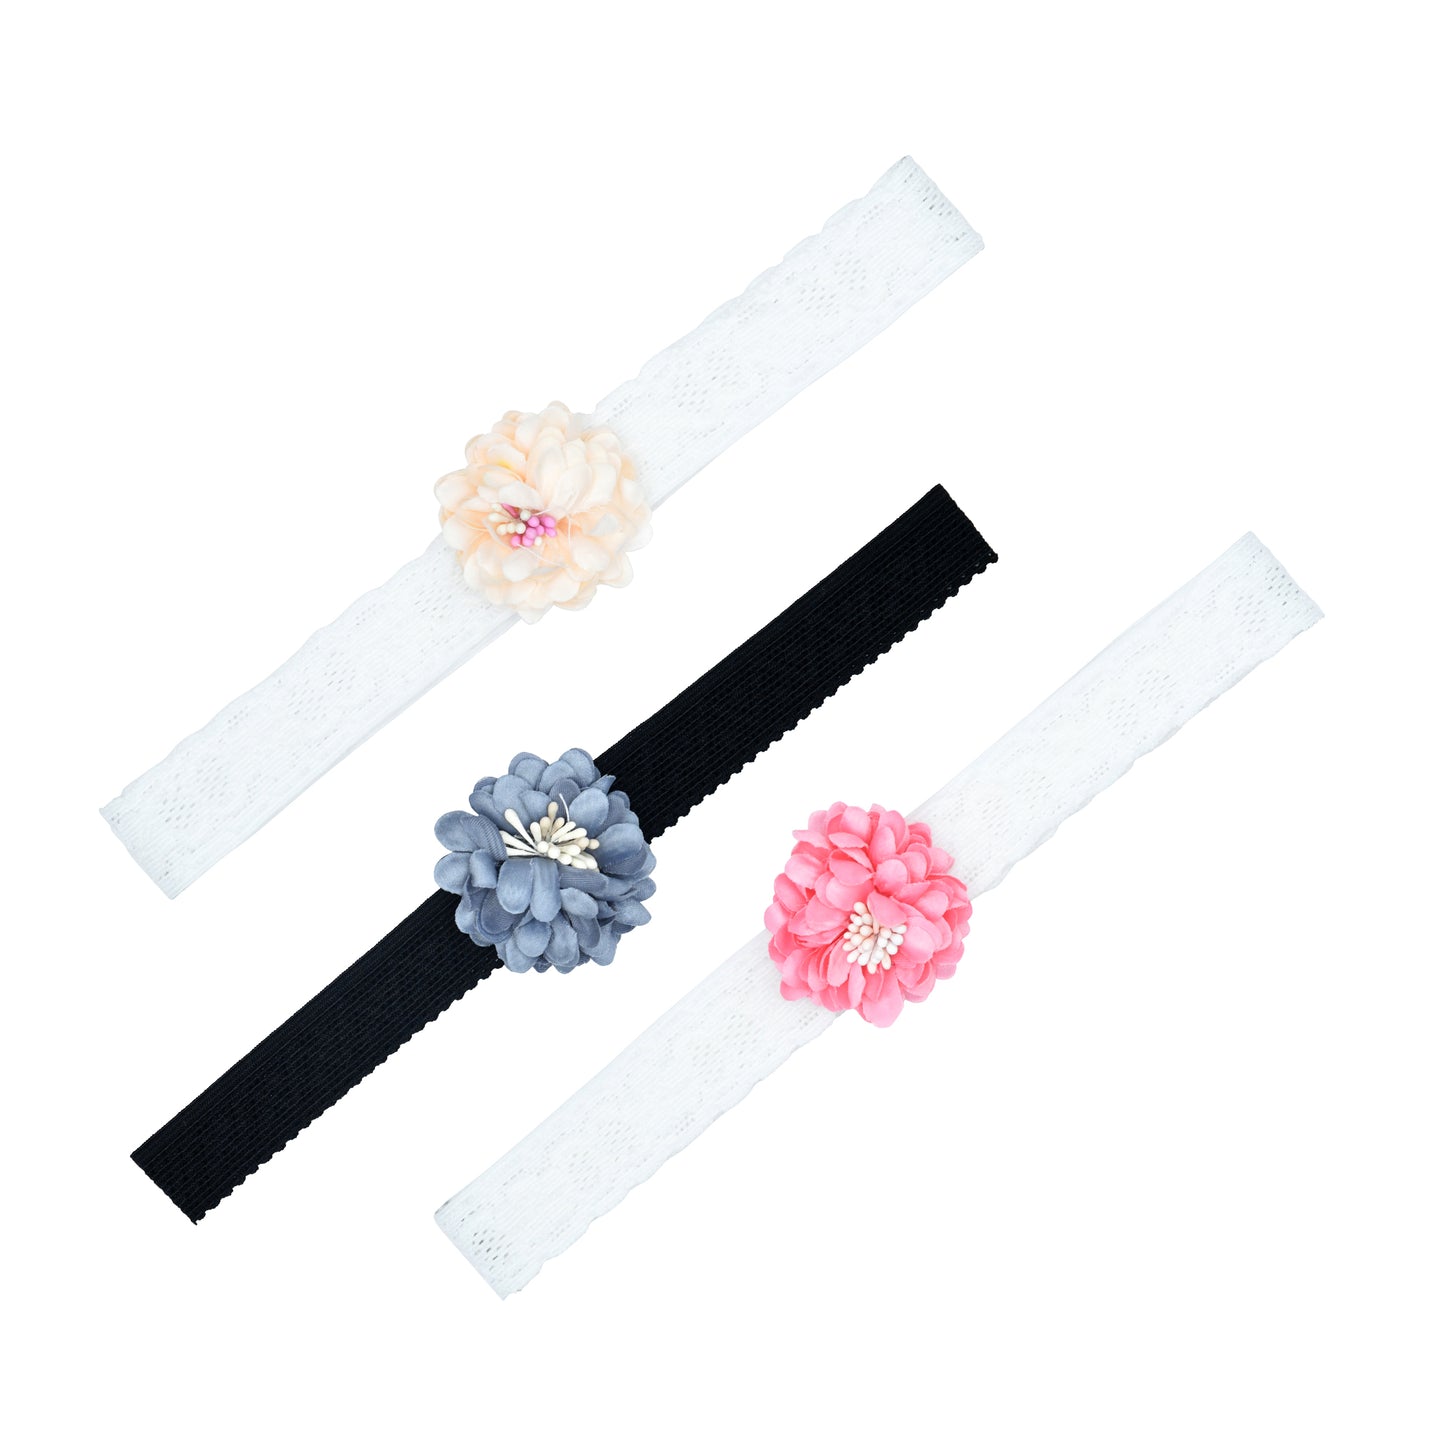 Pack of 3 Multicolor Beautiful Spring Headbands for Girls